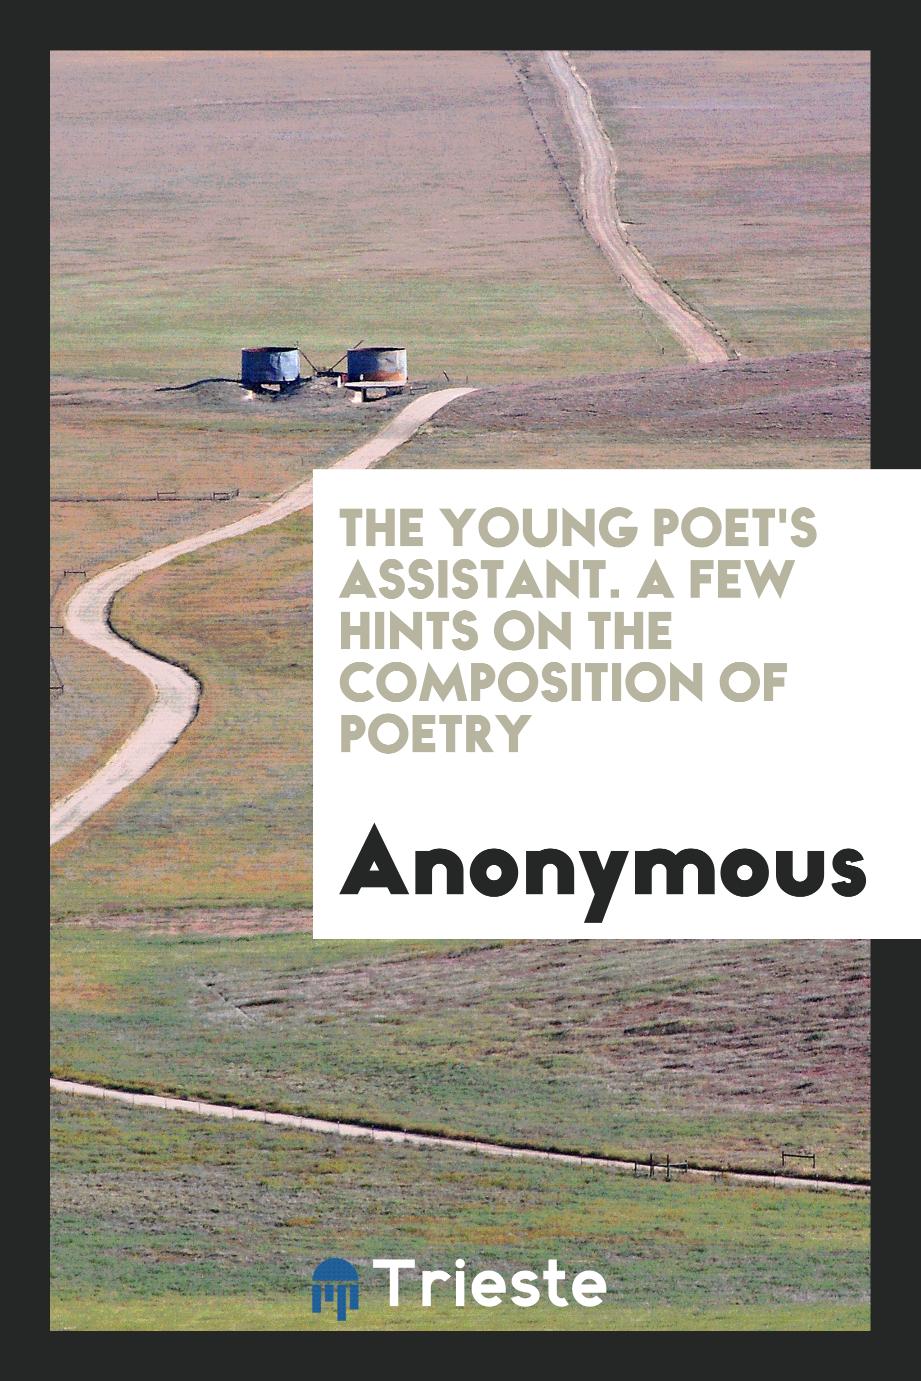 The young poet's assistant. A few hints on the composition of poetry